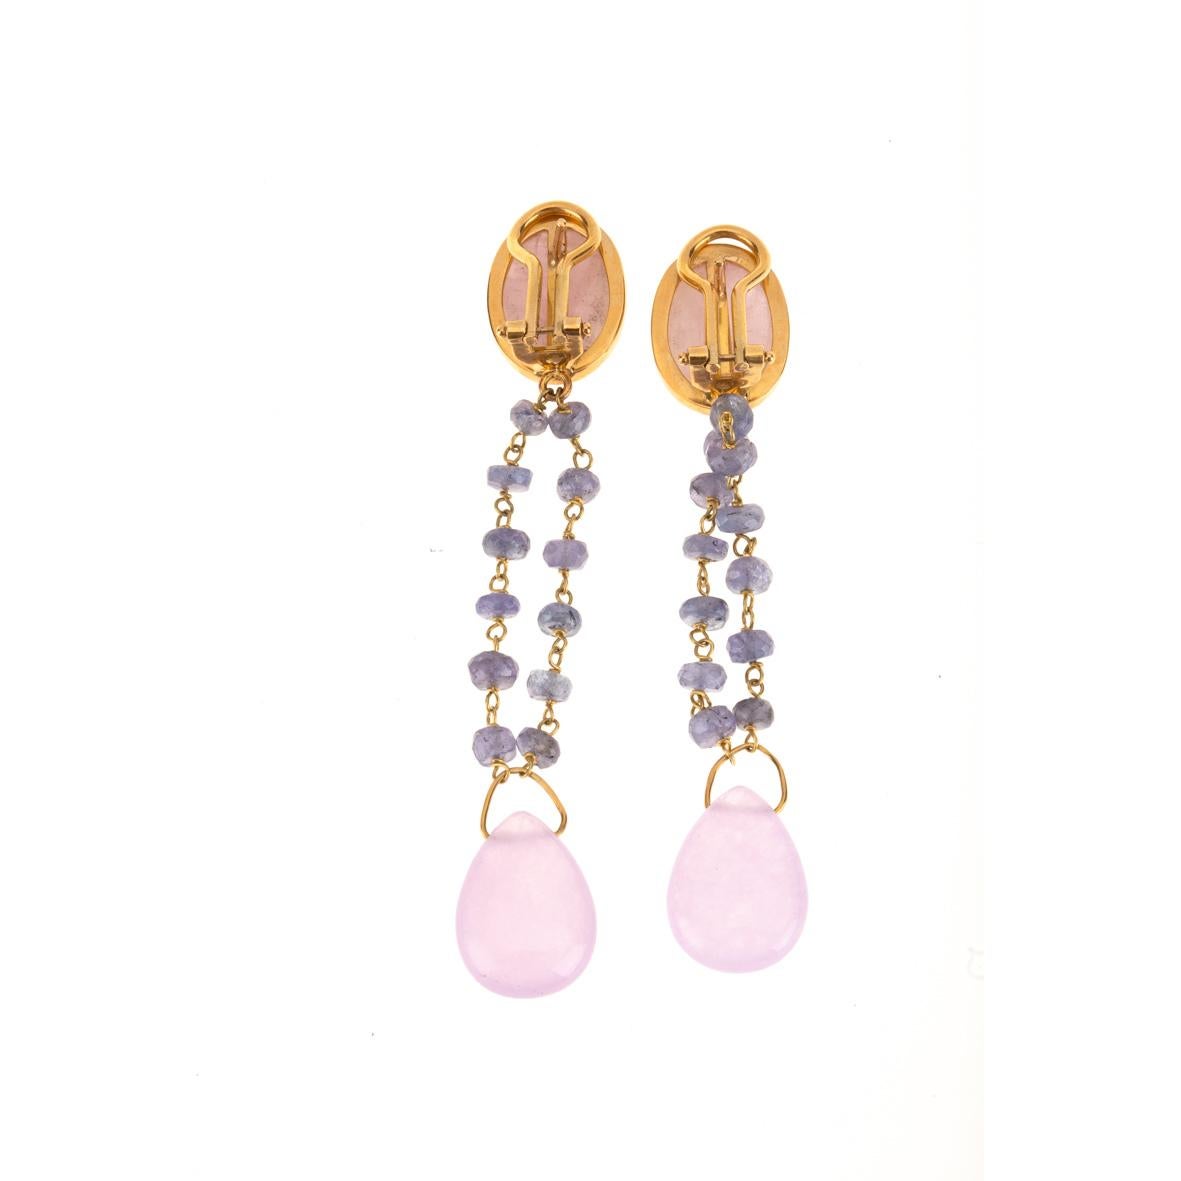 Rose calcedonio cabochon, tanzanite, rare lavender jade drop  18 kt gold 7,80 gr, total length 8 cm.
All Giulia Colussi jewelry is new and has never been previously owned or worn. Each item will arrive at your door beautifully gift wrapped in our